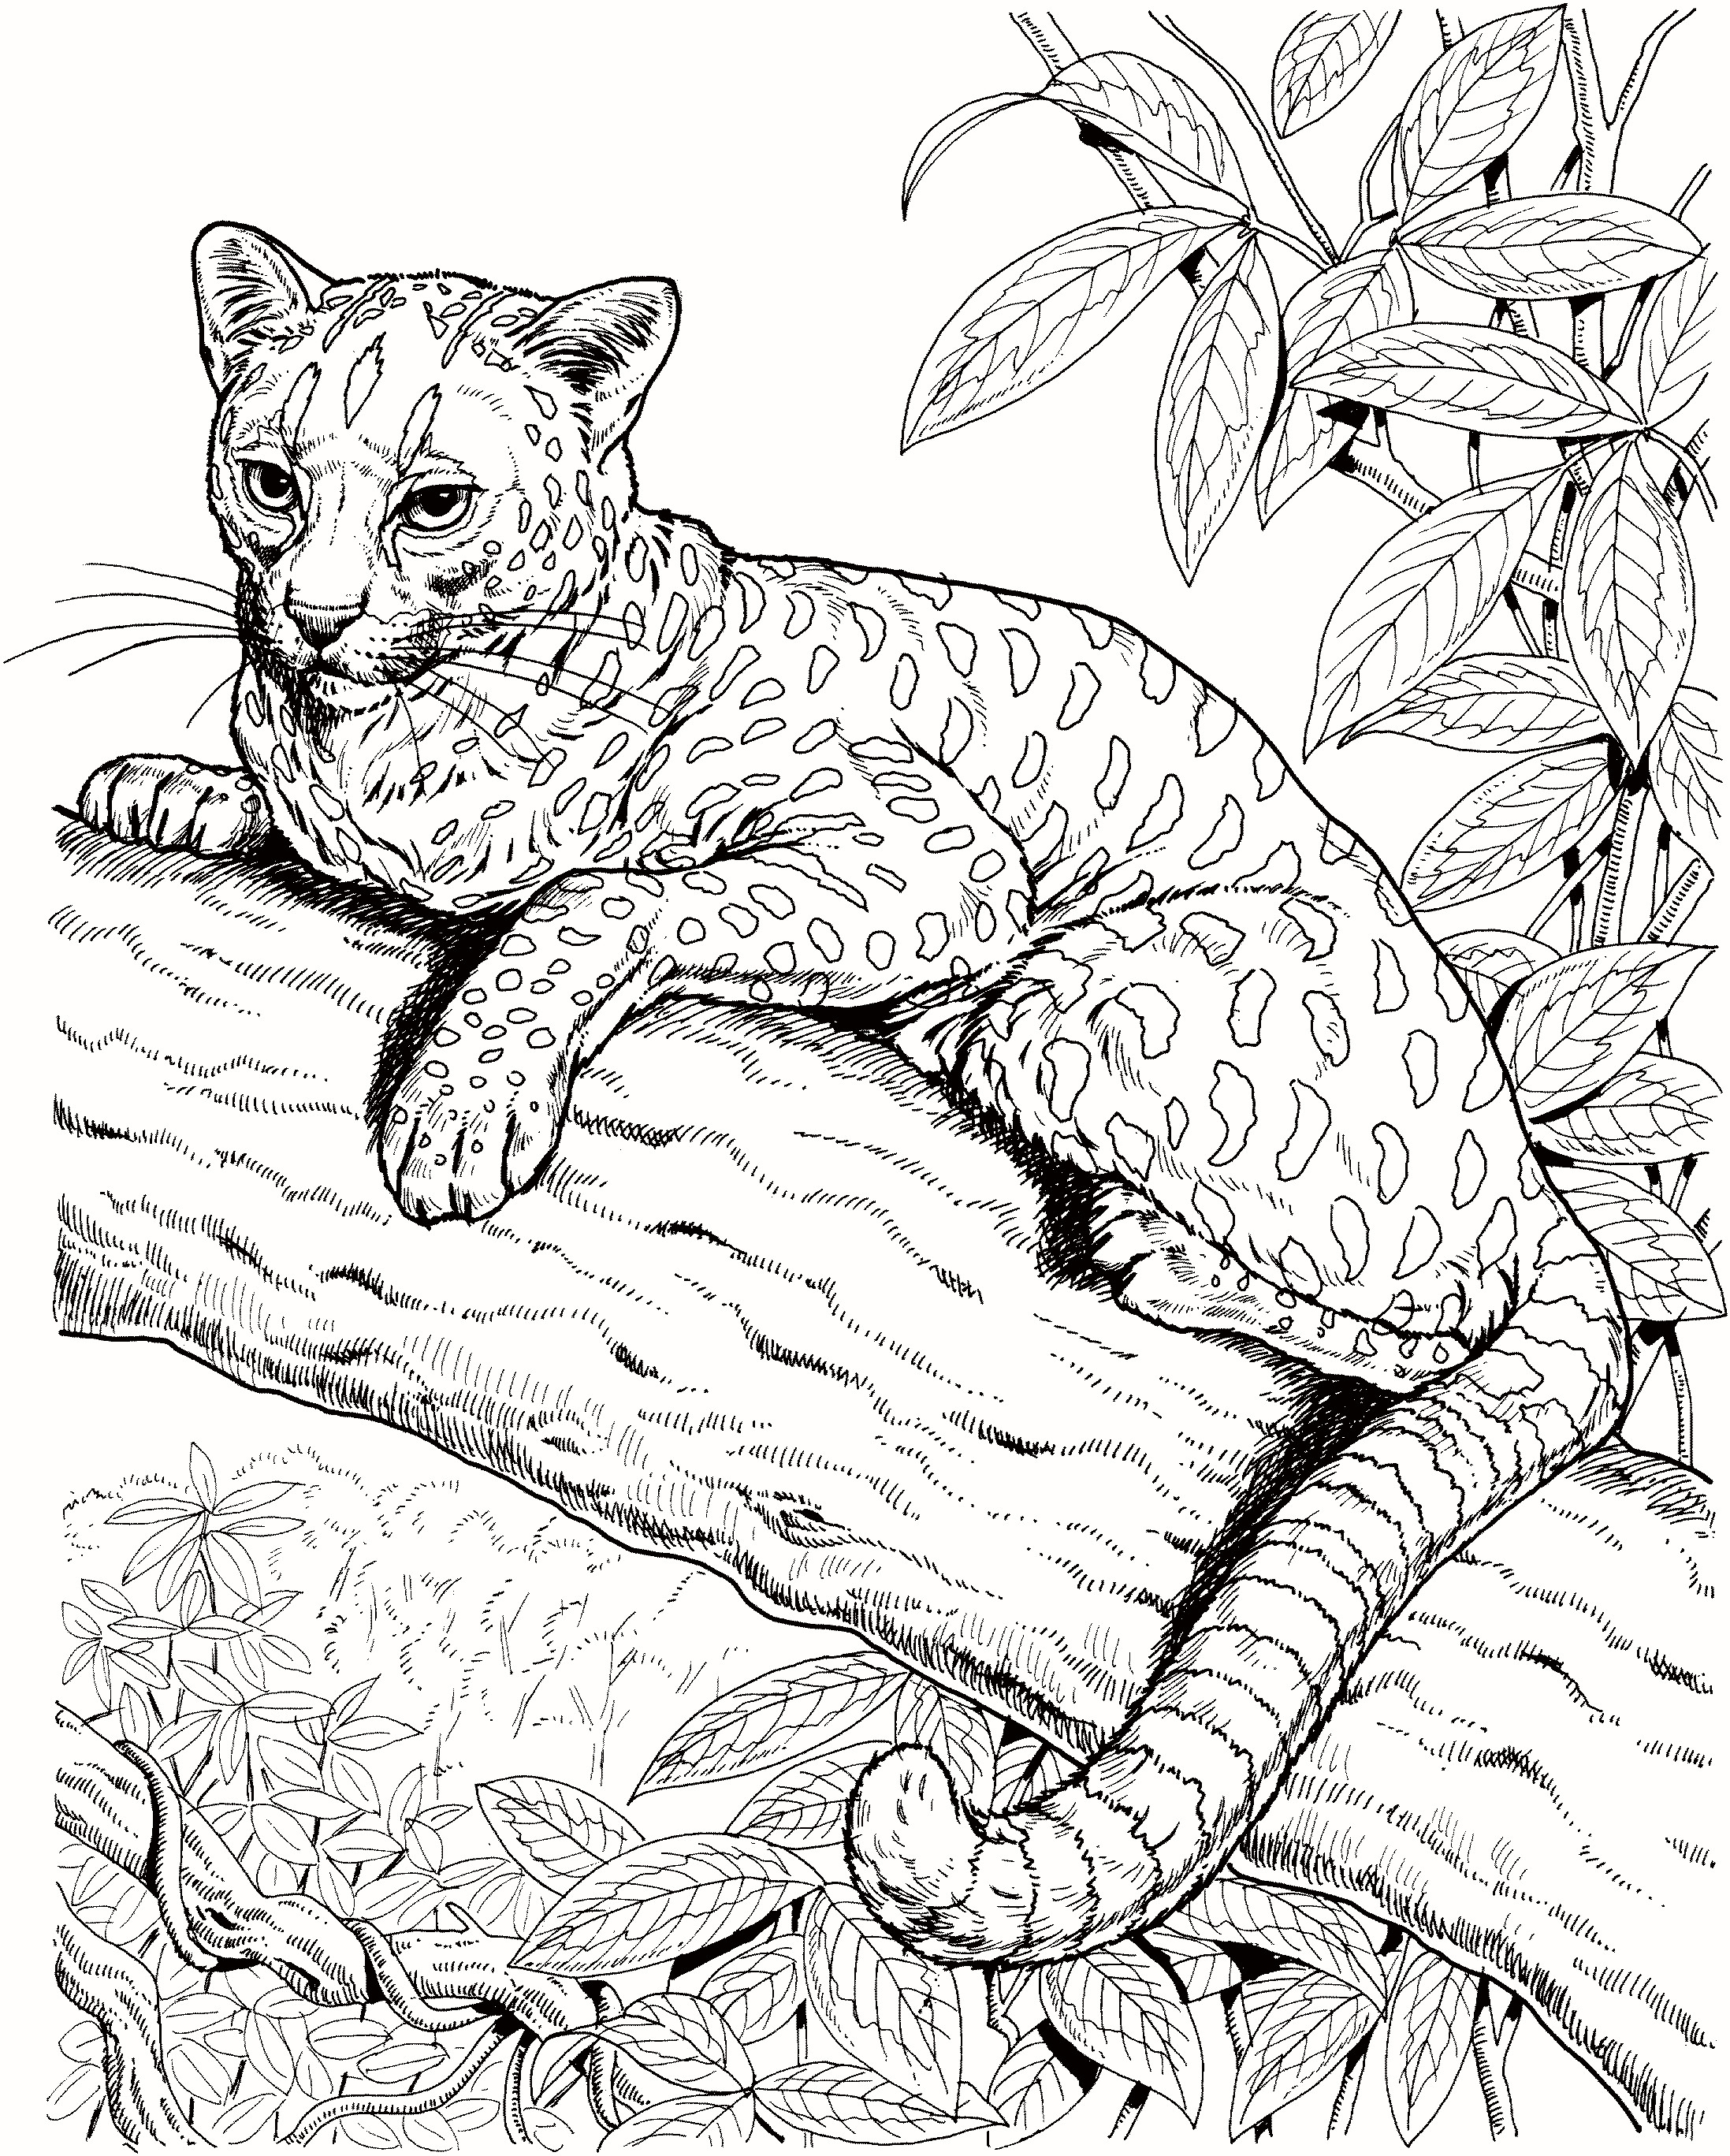 Baby Jaguar Coloring Pages Lovely Extinct Rainforest Animals Endangered Species And Outdoor